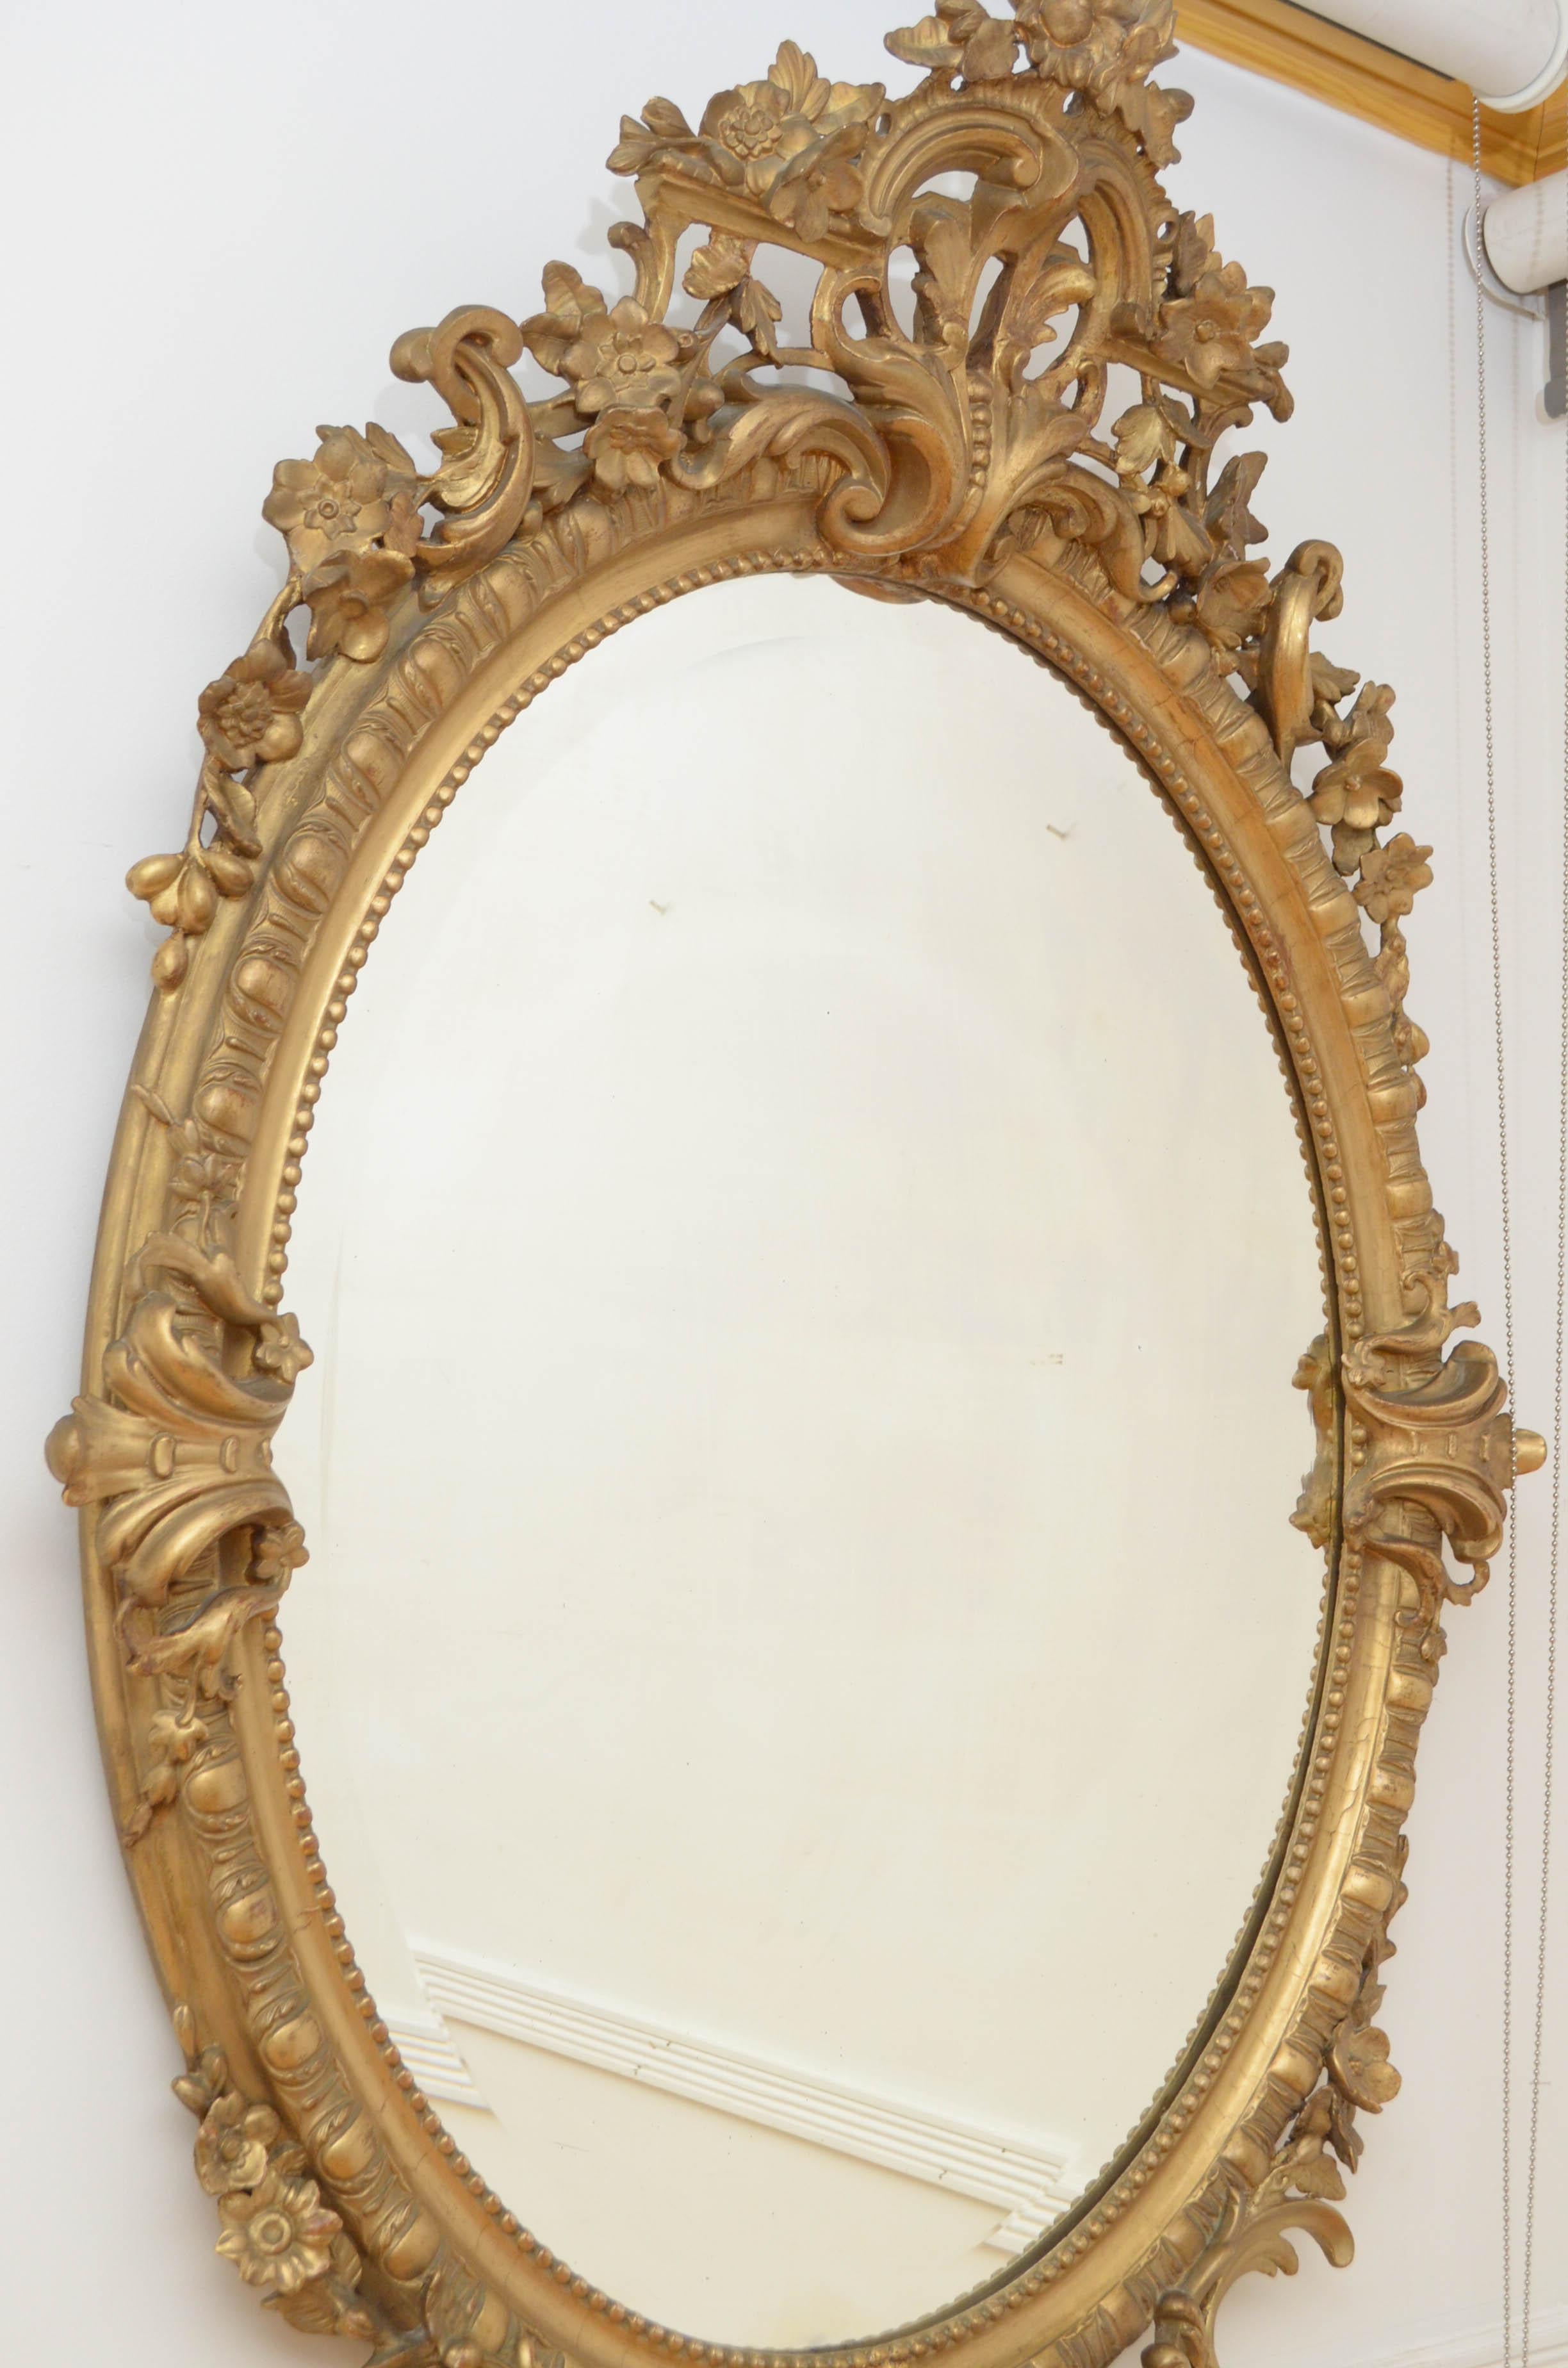 Sn4863 large 19th century wall mirror in giltwood, having original beveled edge glass with some imperfections in beaded and carved frame with extensive floral and shell decoration throughout. This antique mirror retains its original glass, original